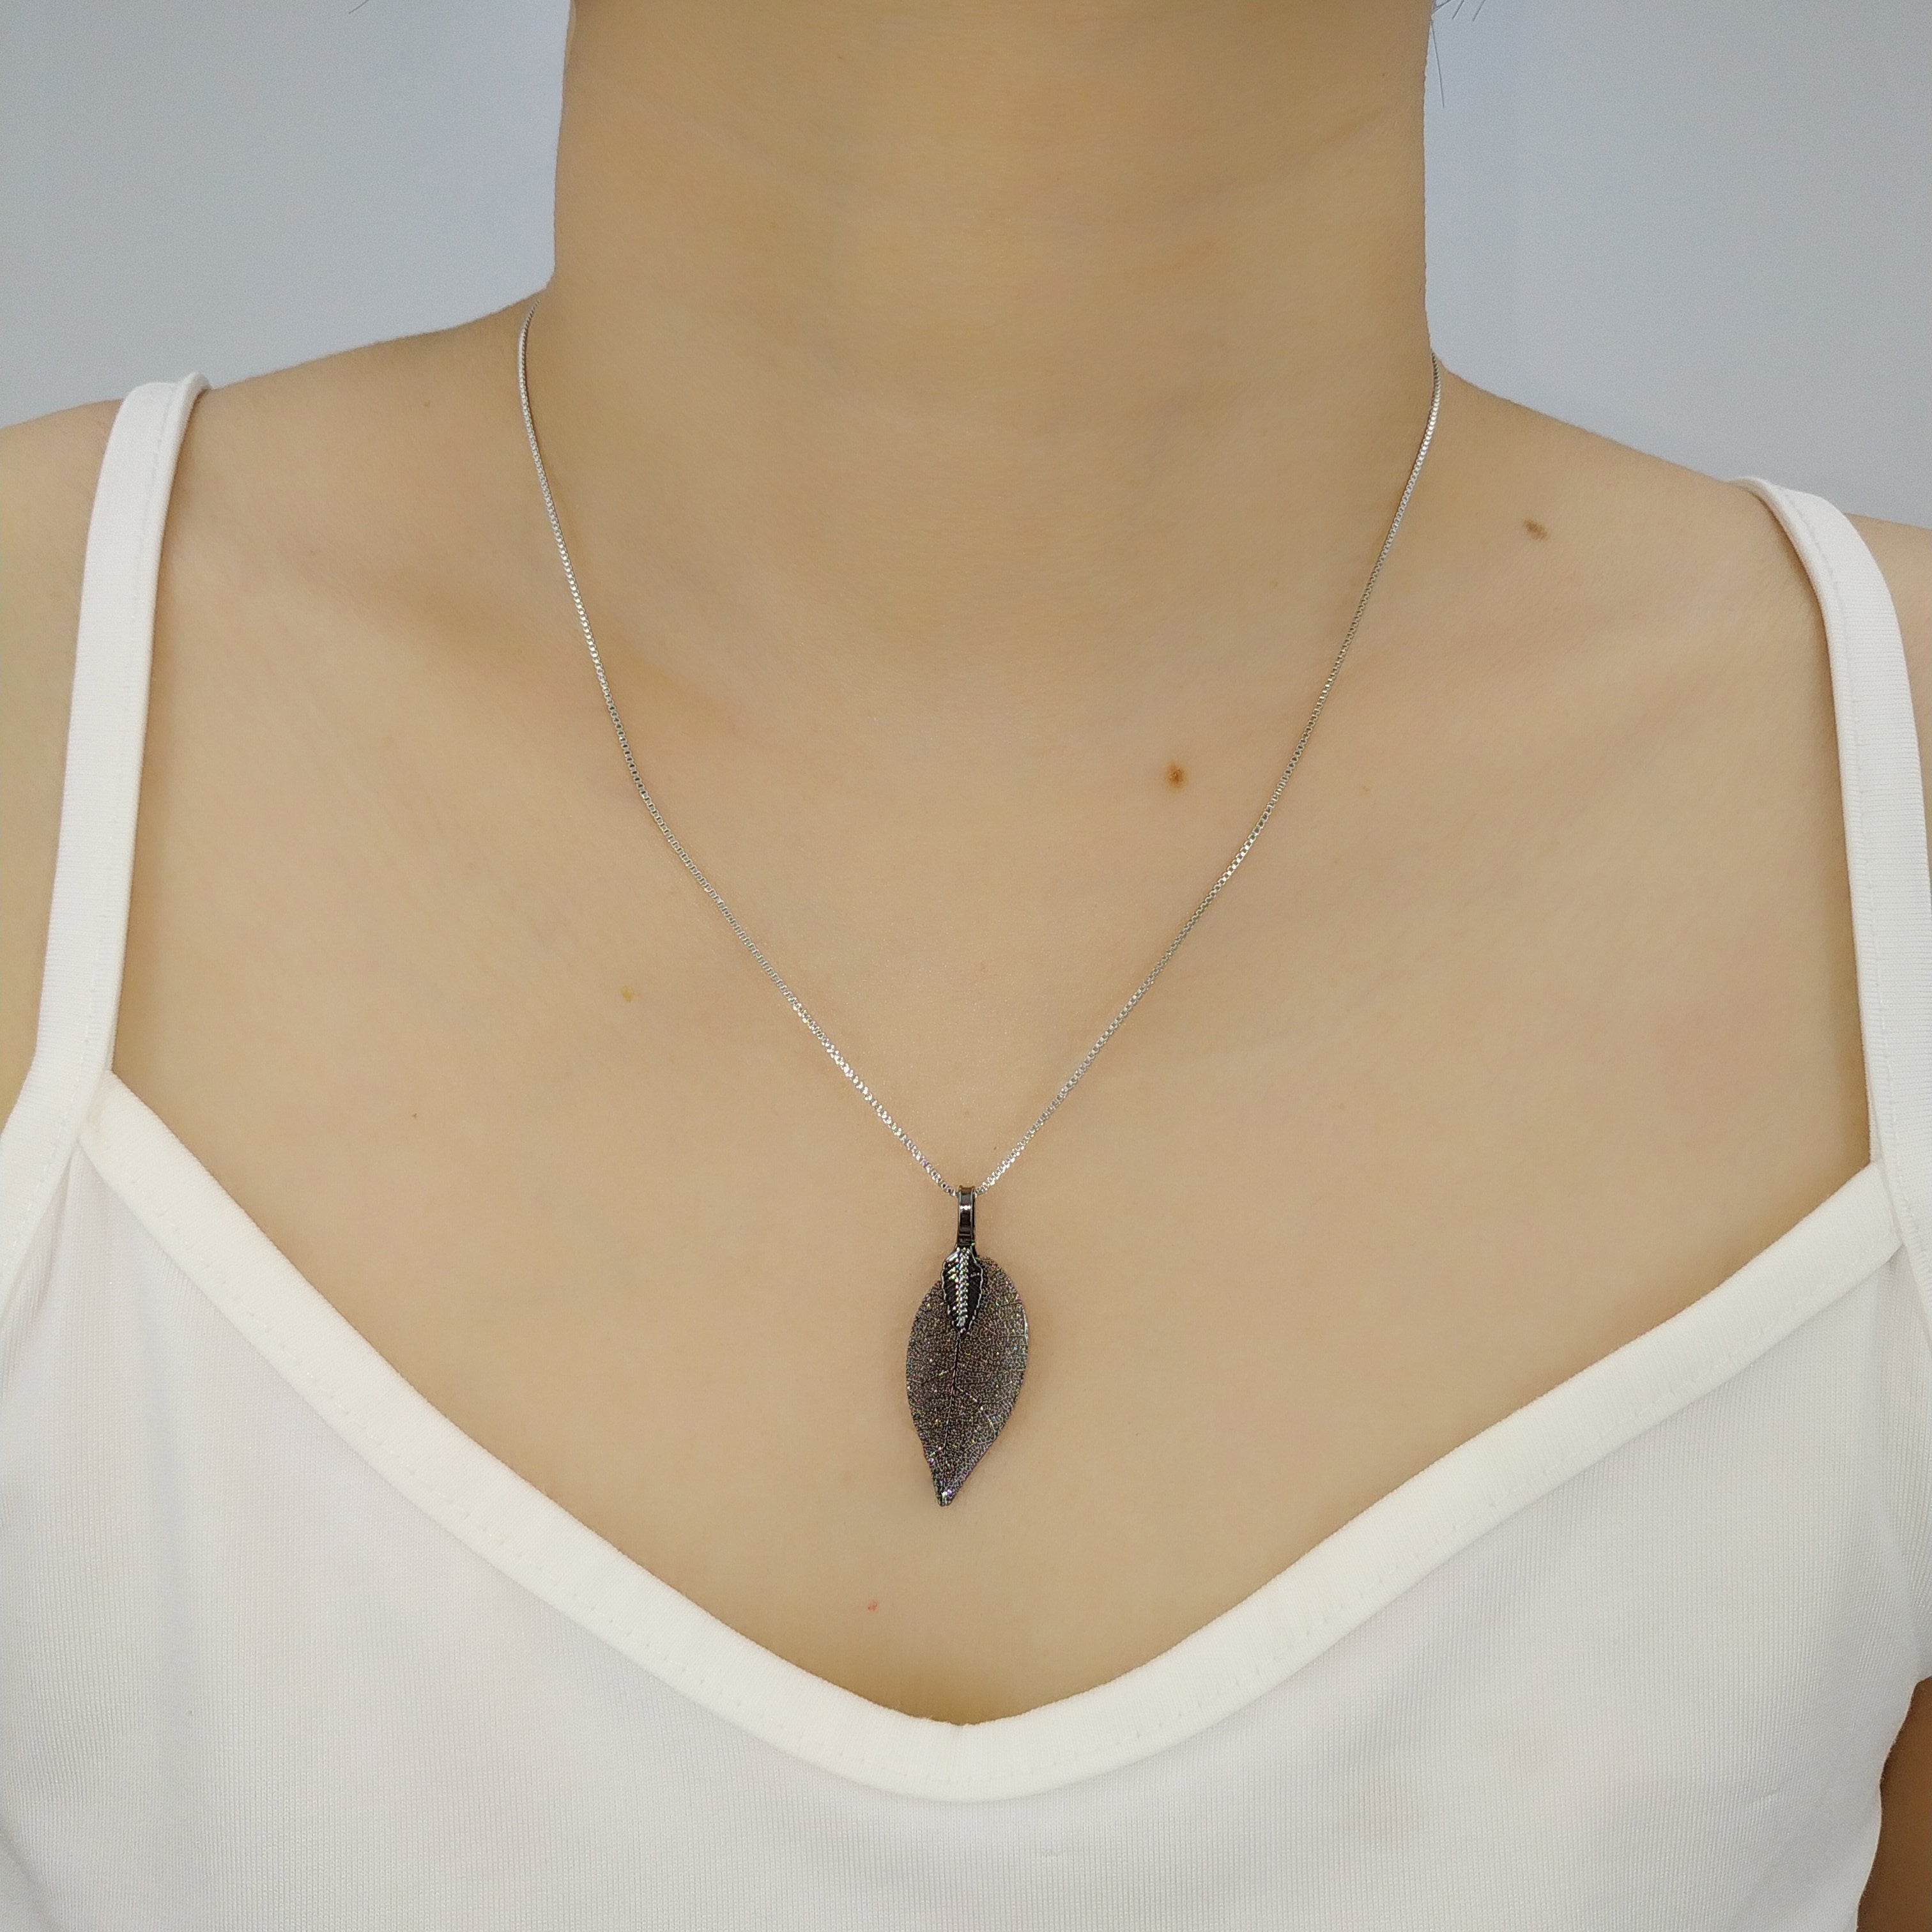 Small Real Leaf Pendant Necklace